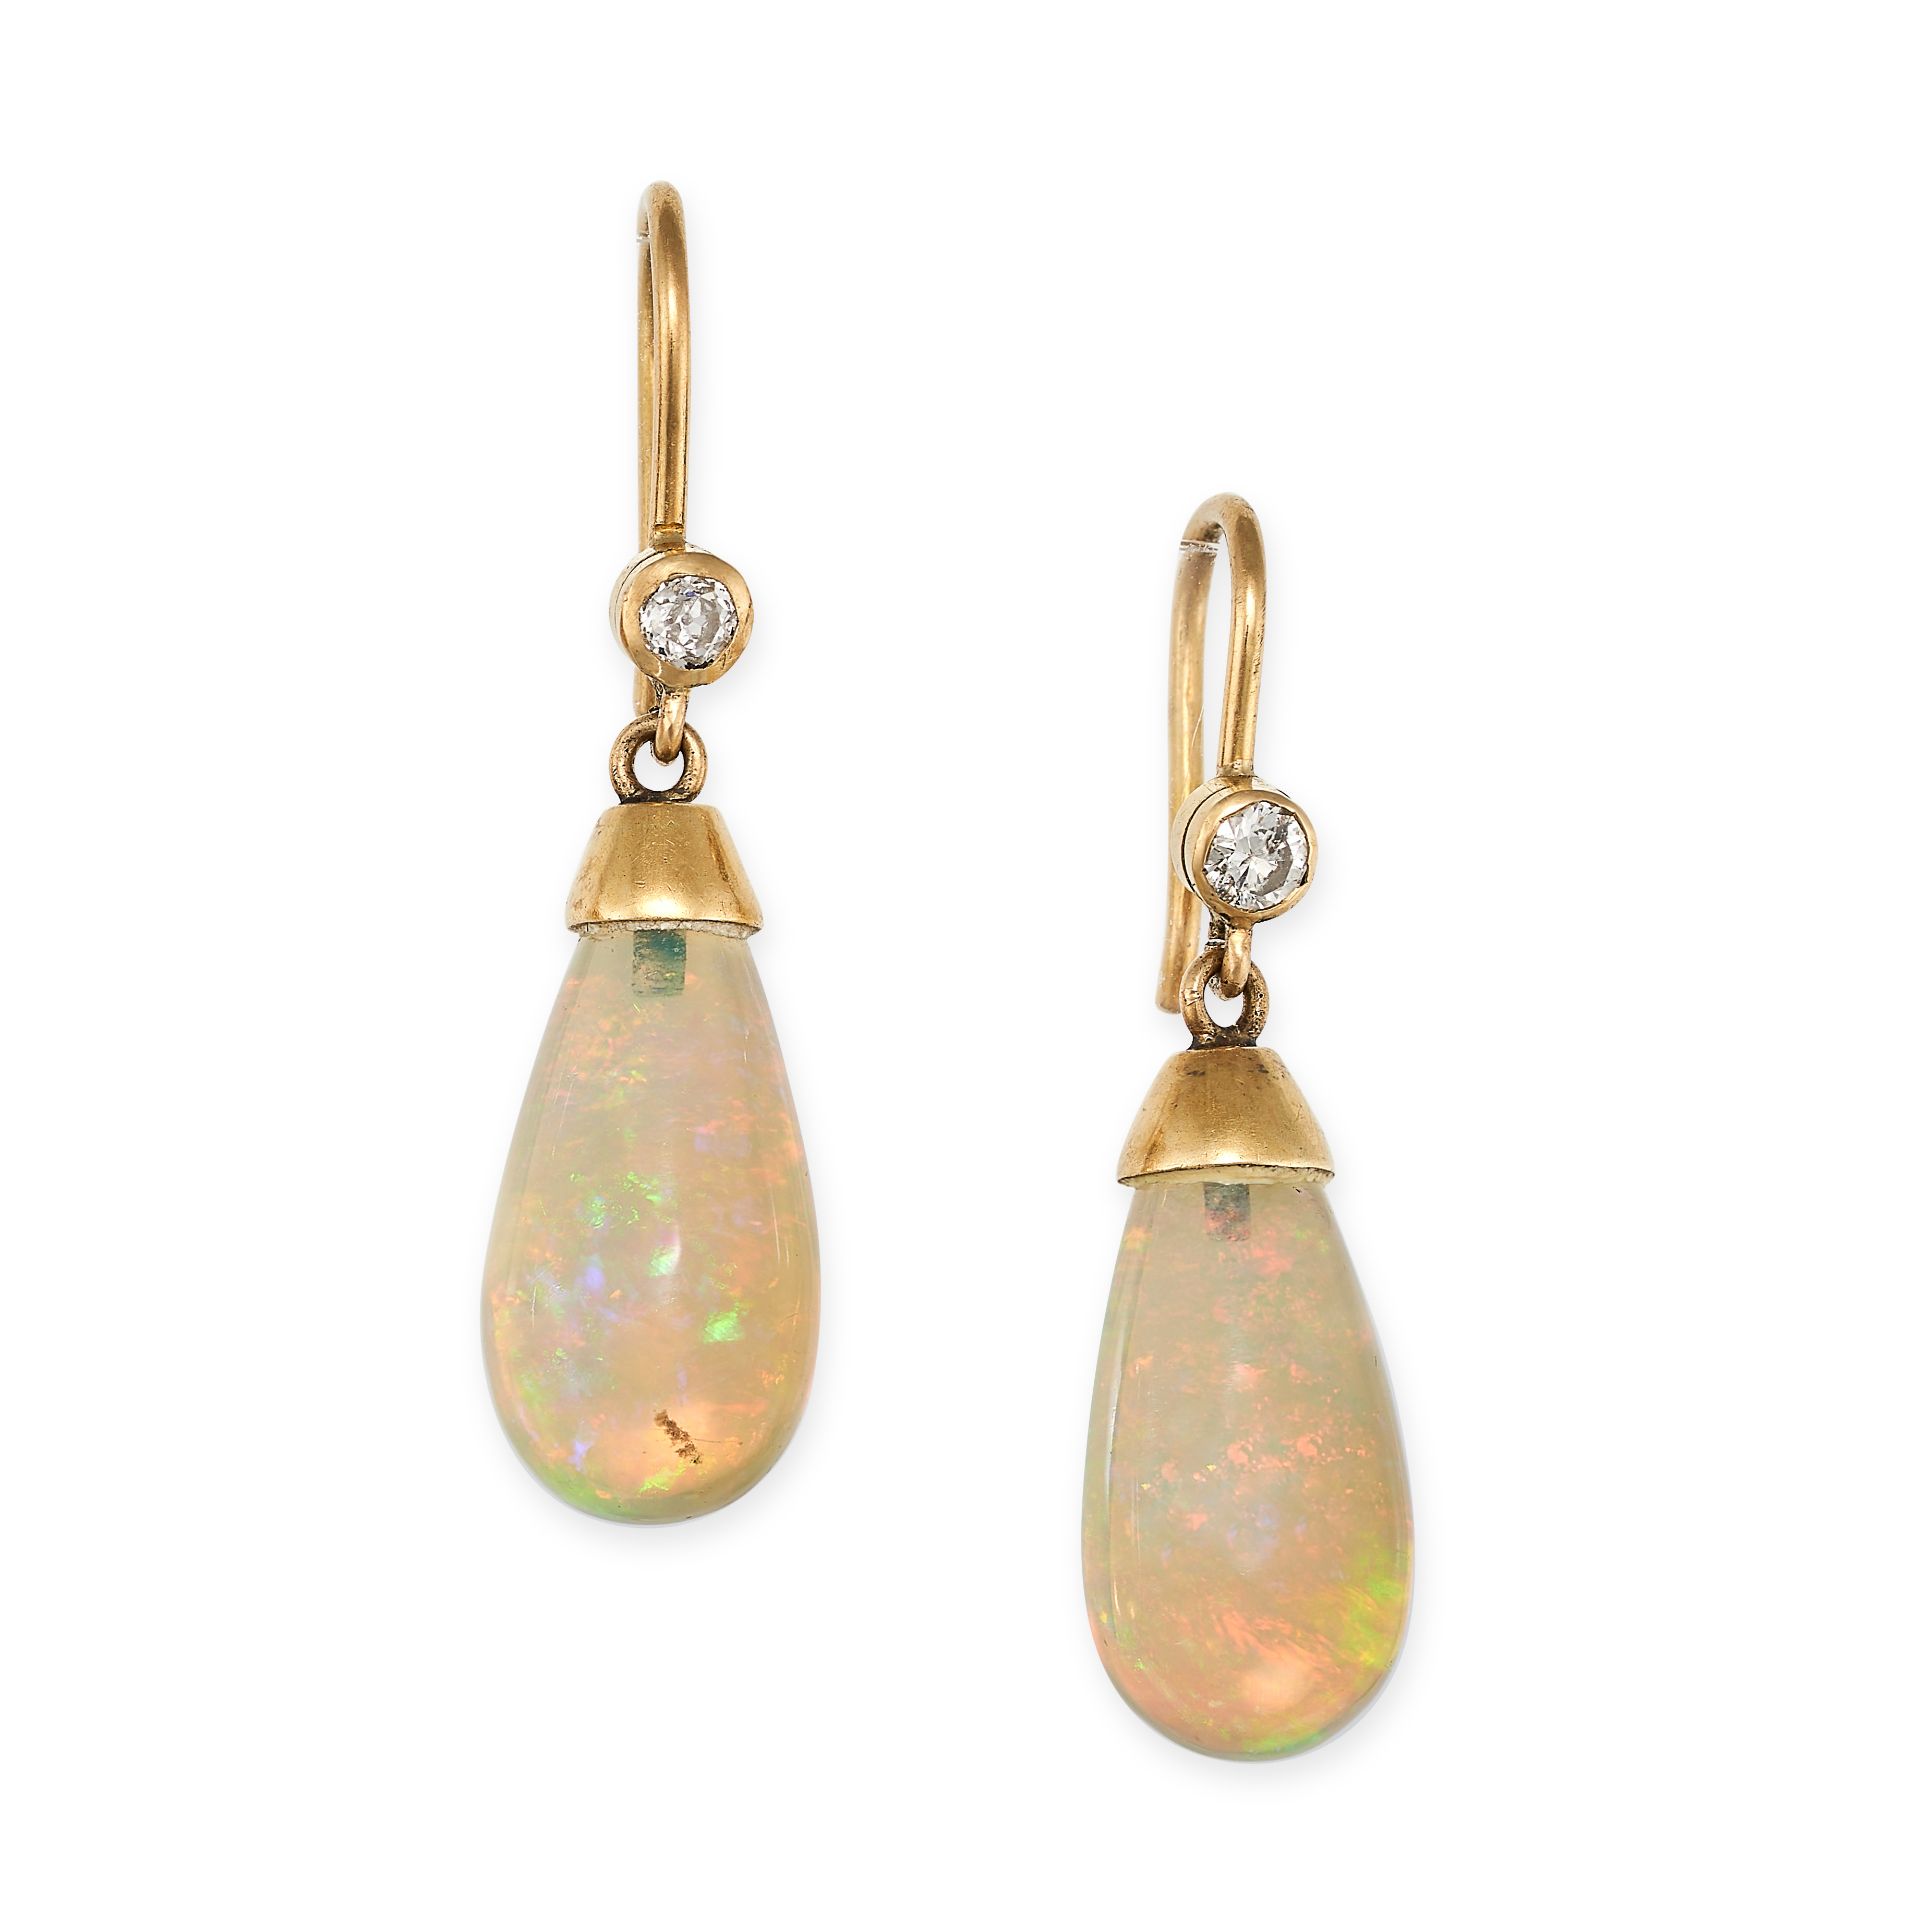 A PAIR OF DIAMOND AND OPAL DROP EARRINGS in yellow gold, each set with a round brilliant cut diam...